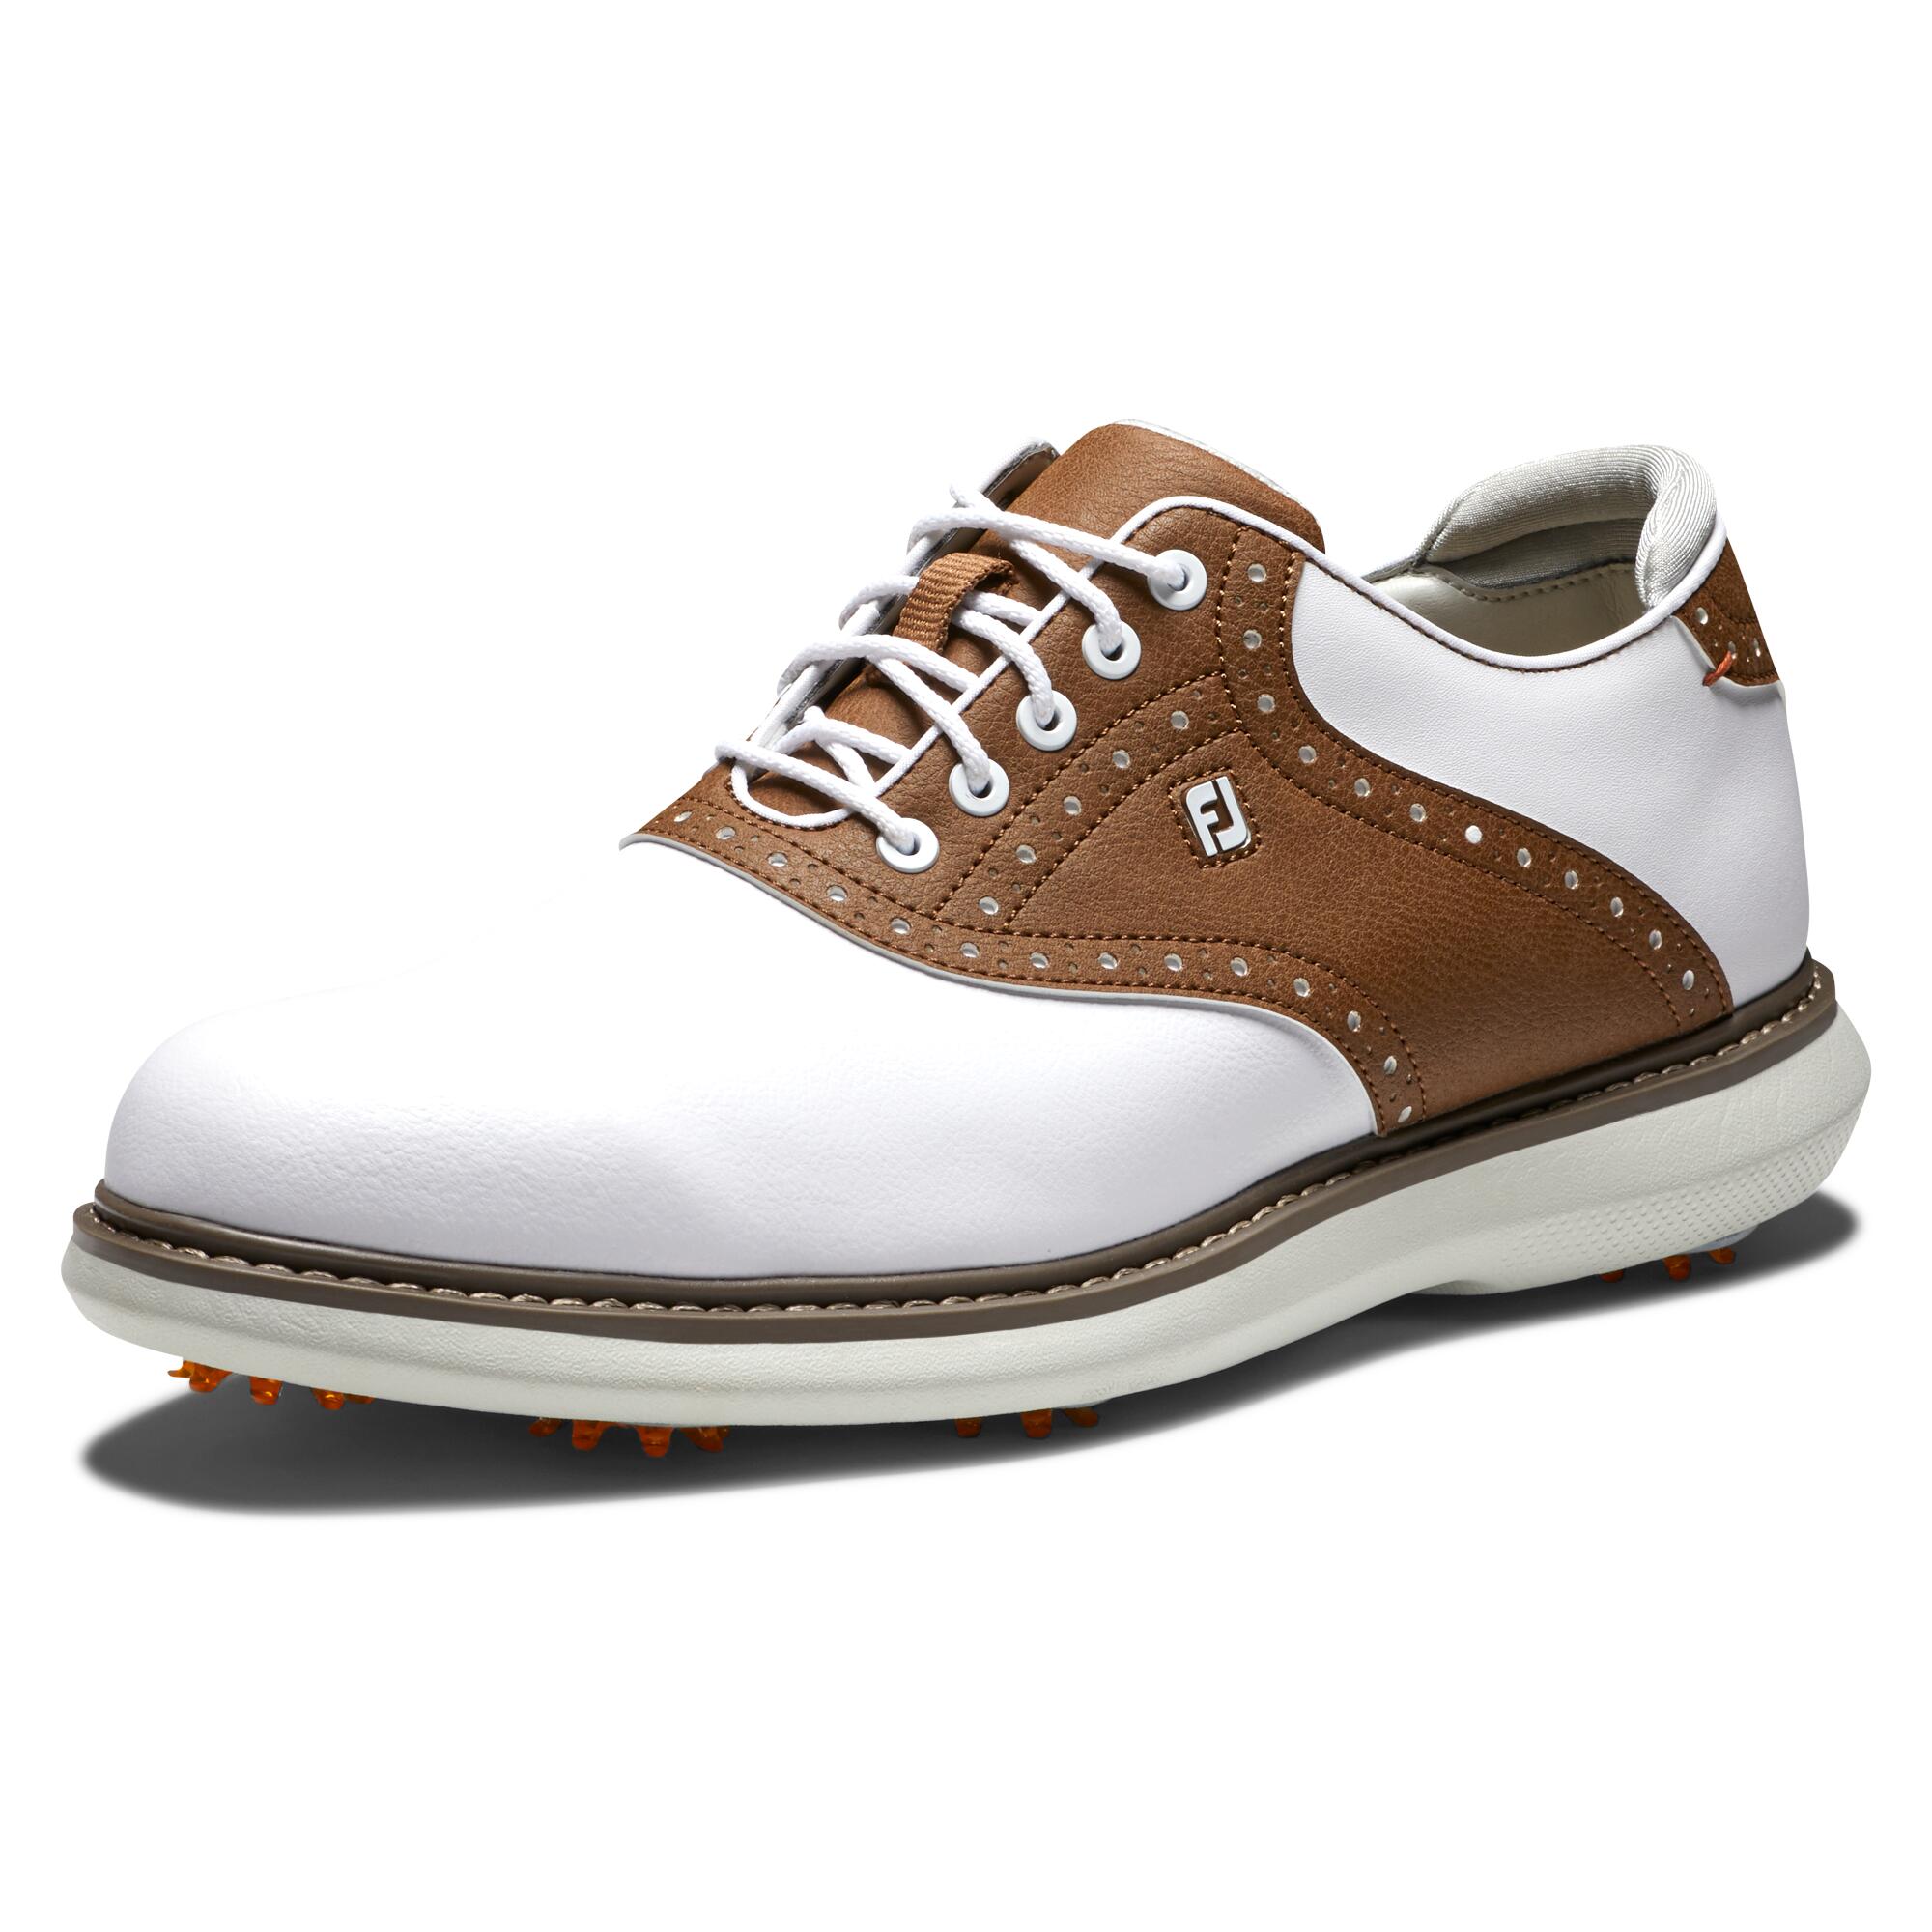 Men's golf shoes Footjoy Traditions - white and brown 5/7